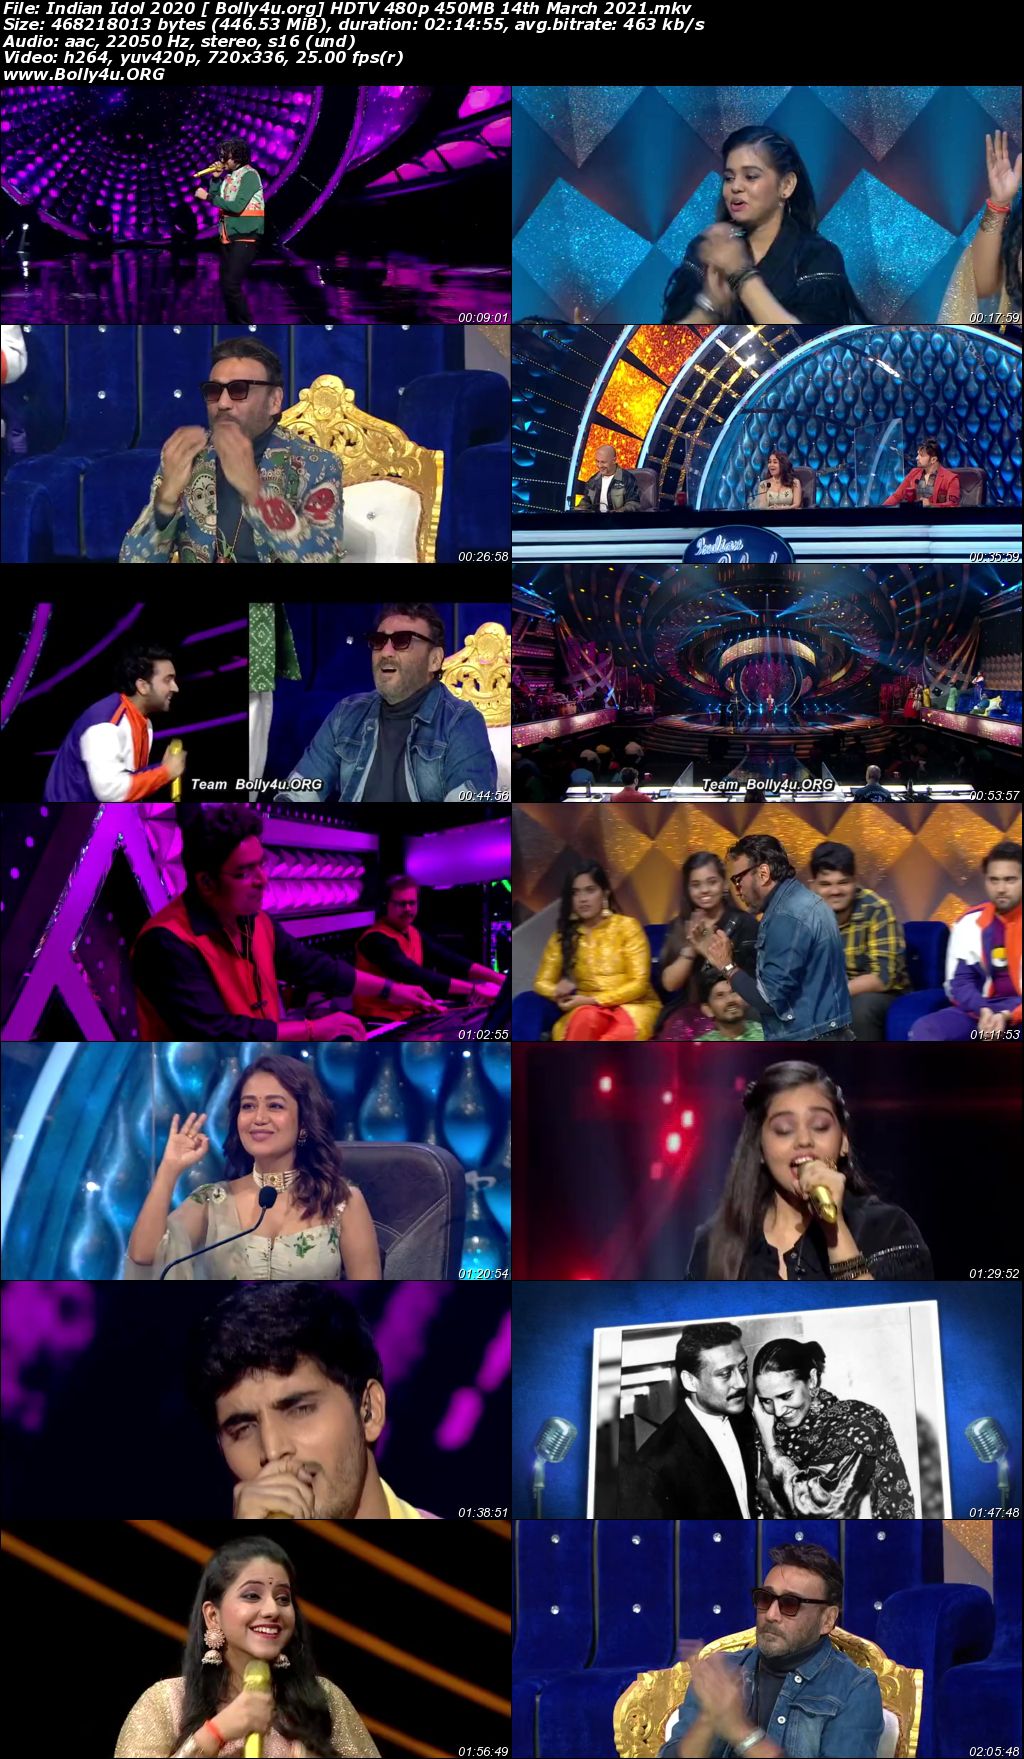 Indian Idol 2020 HDTV 480p 450MB 14 March 2021 Download